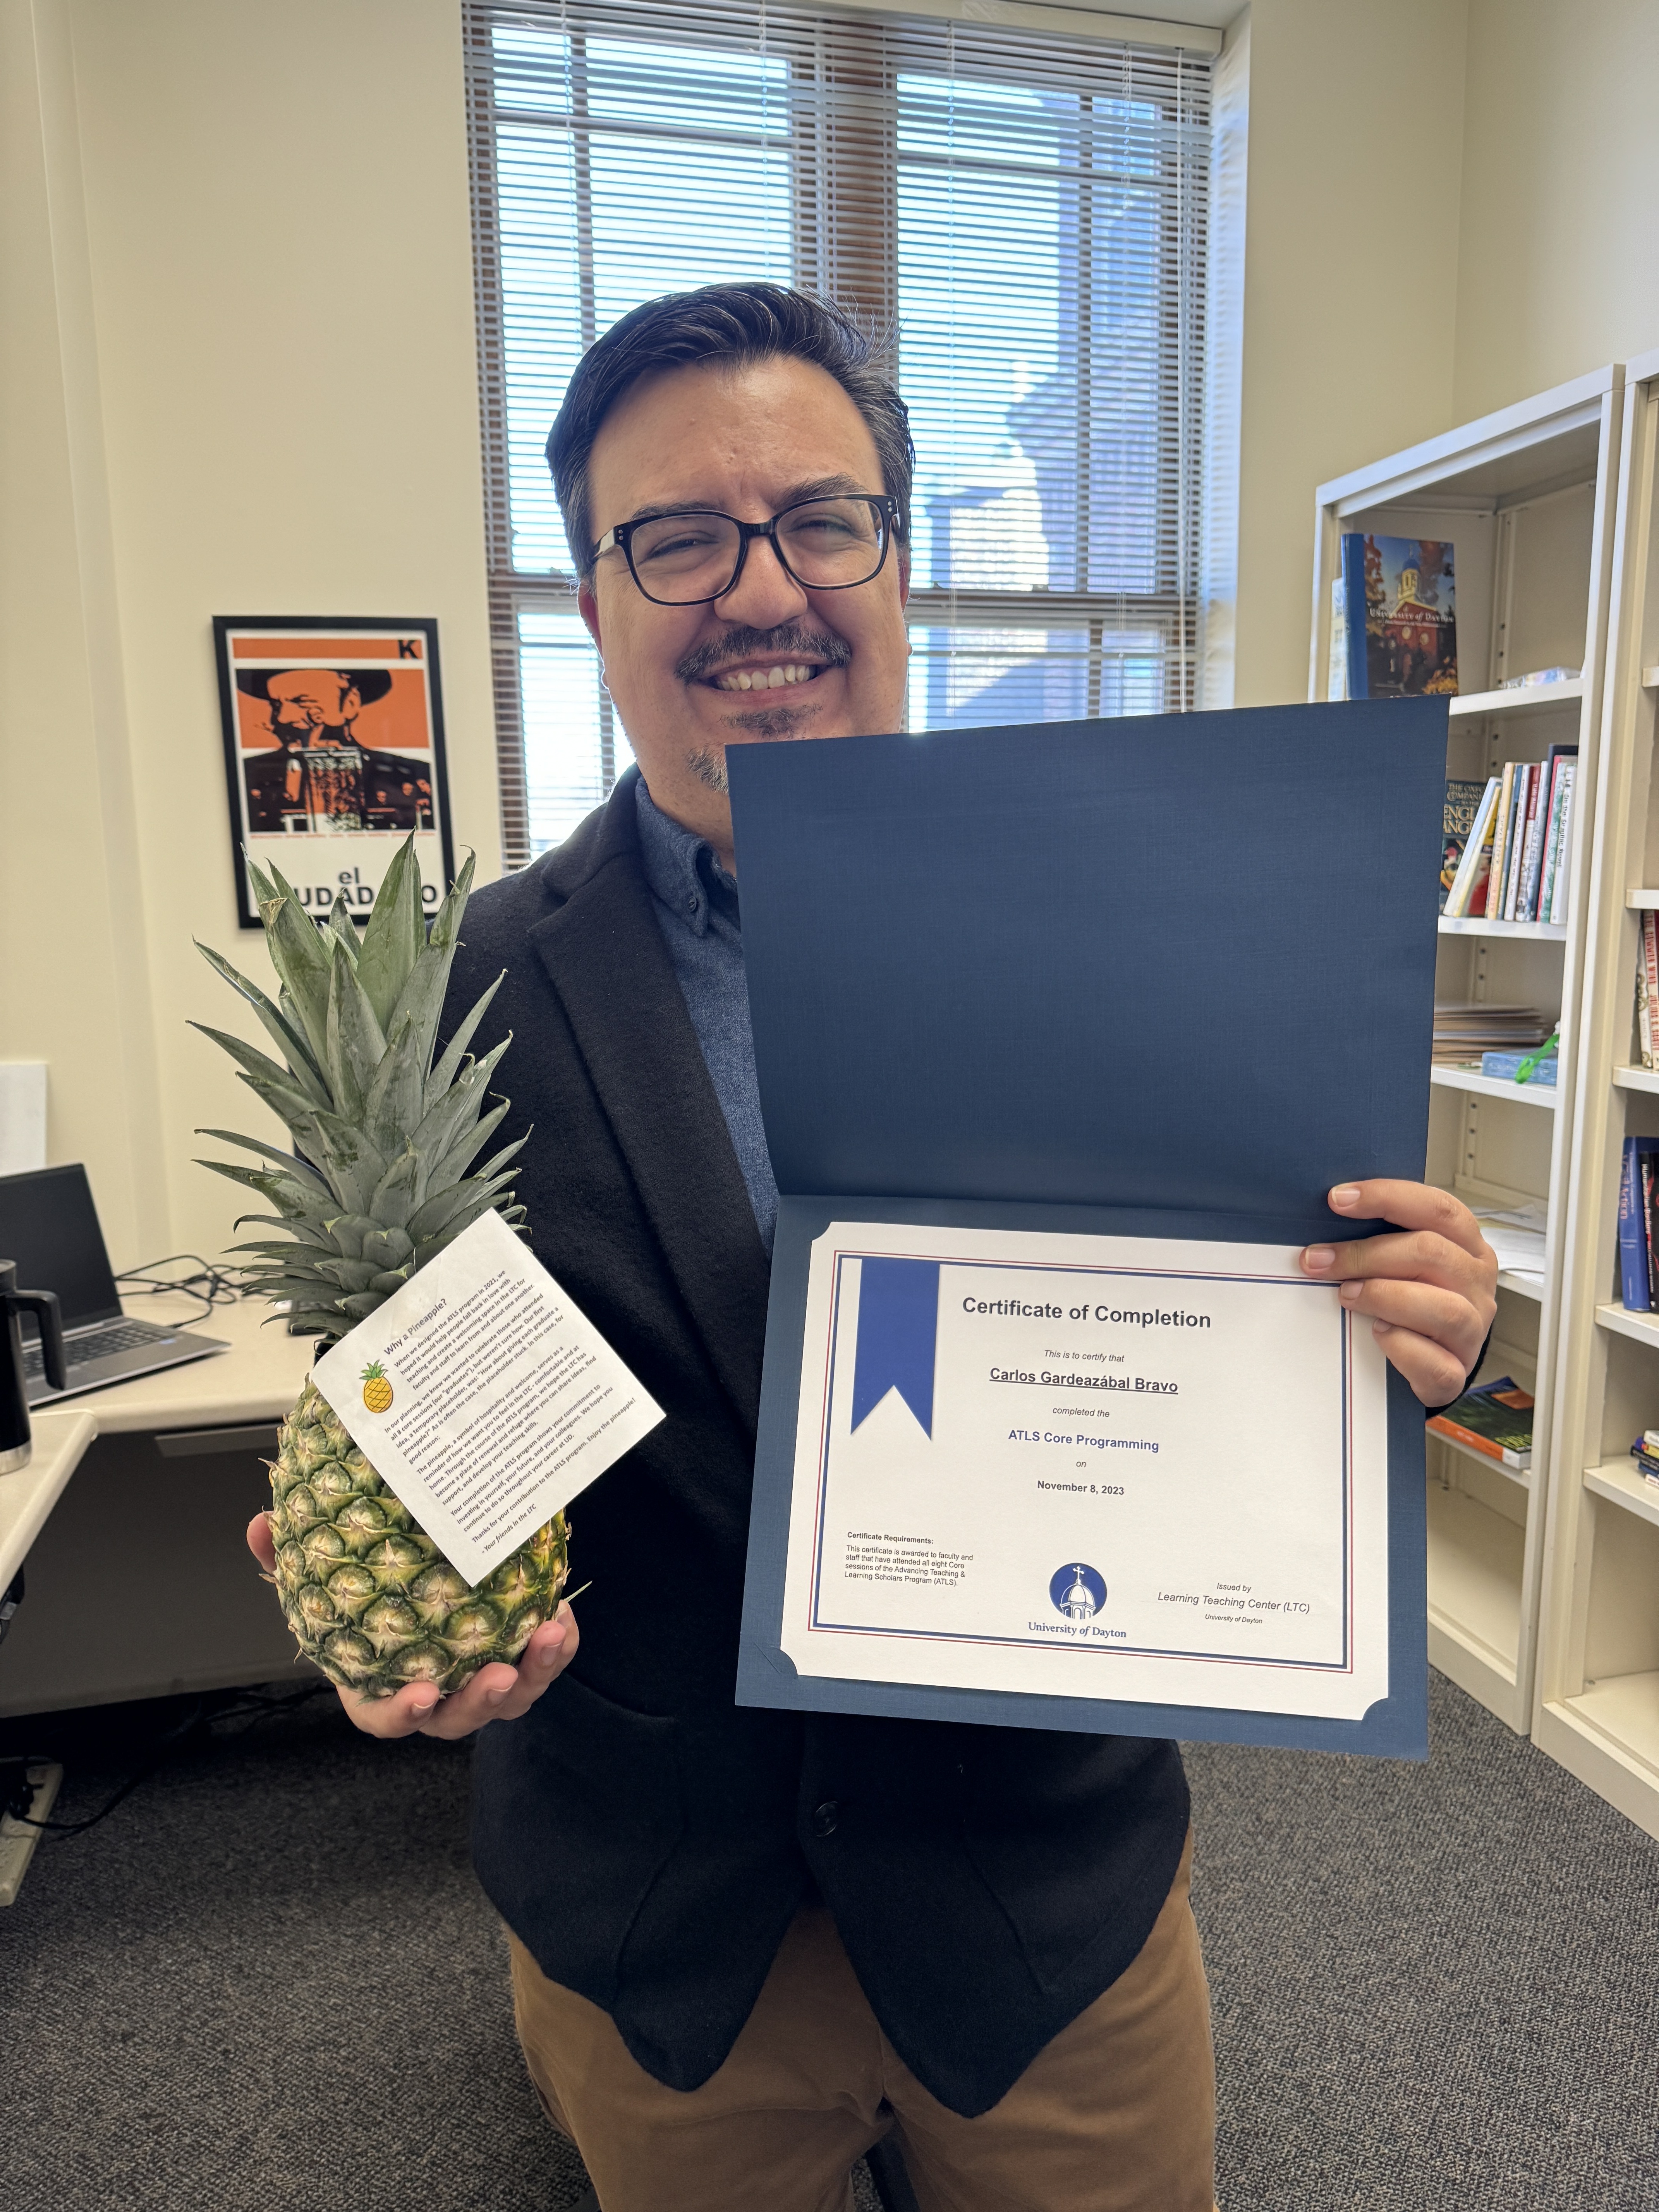 Faculty member Carlos Gardeazábal Bravo poses with a pineapple and diploma to signify graduation from ATLS.